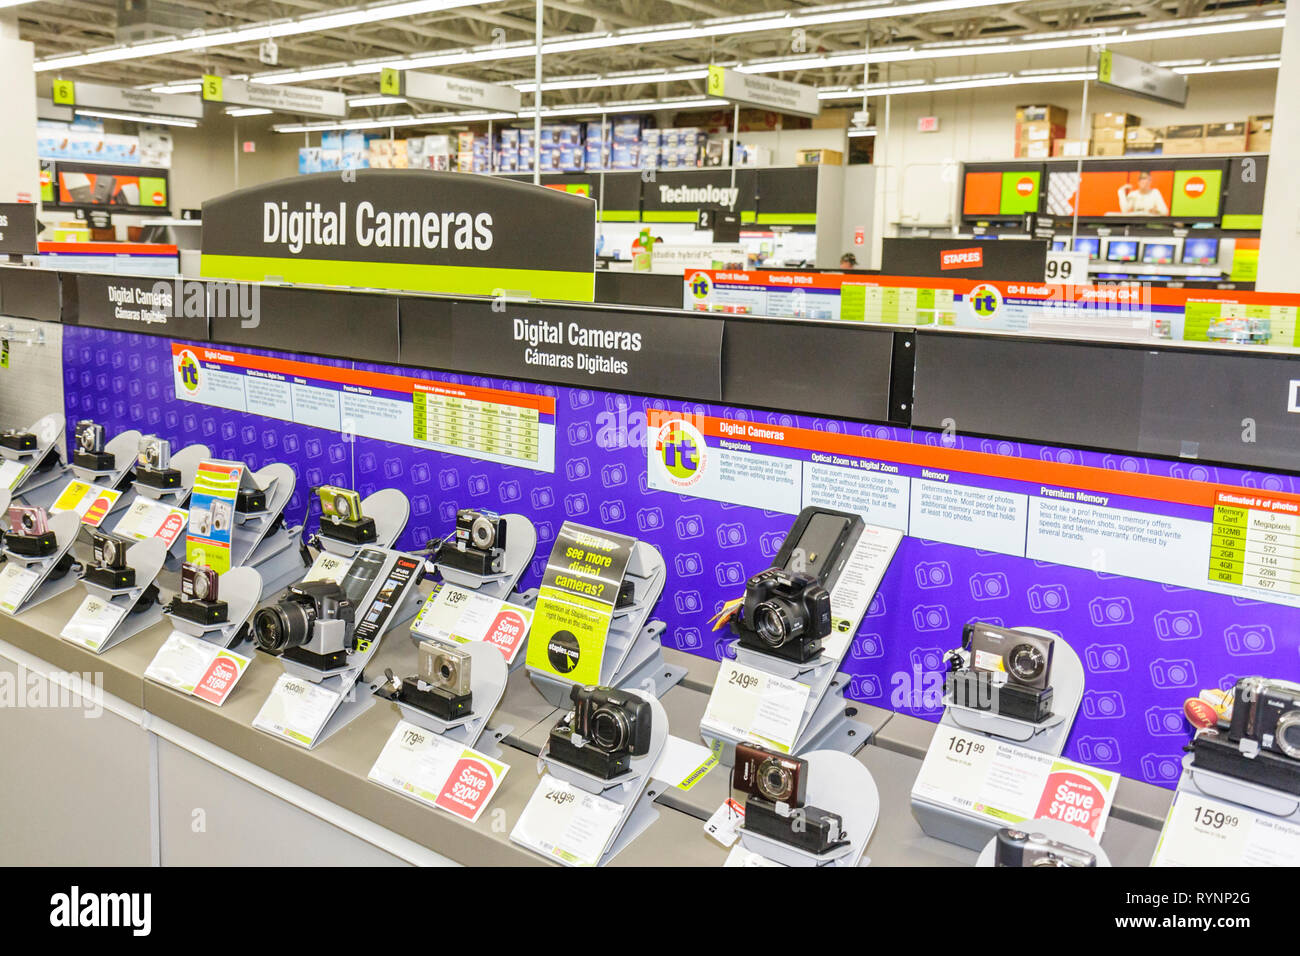 Miami Florida,Staples,office supply products store,chain,display sale digital camera,price,FL090222109 Stock Photo